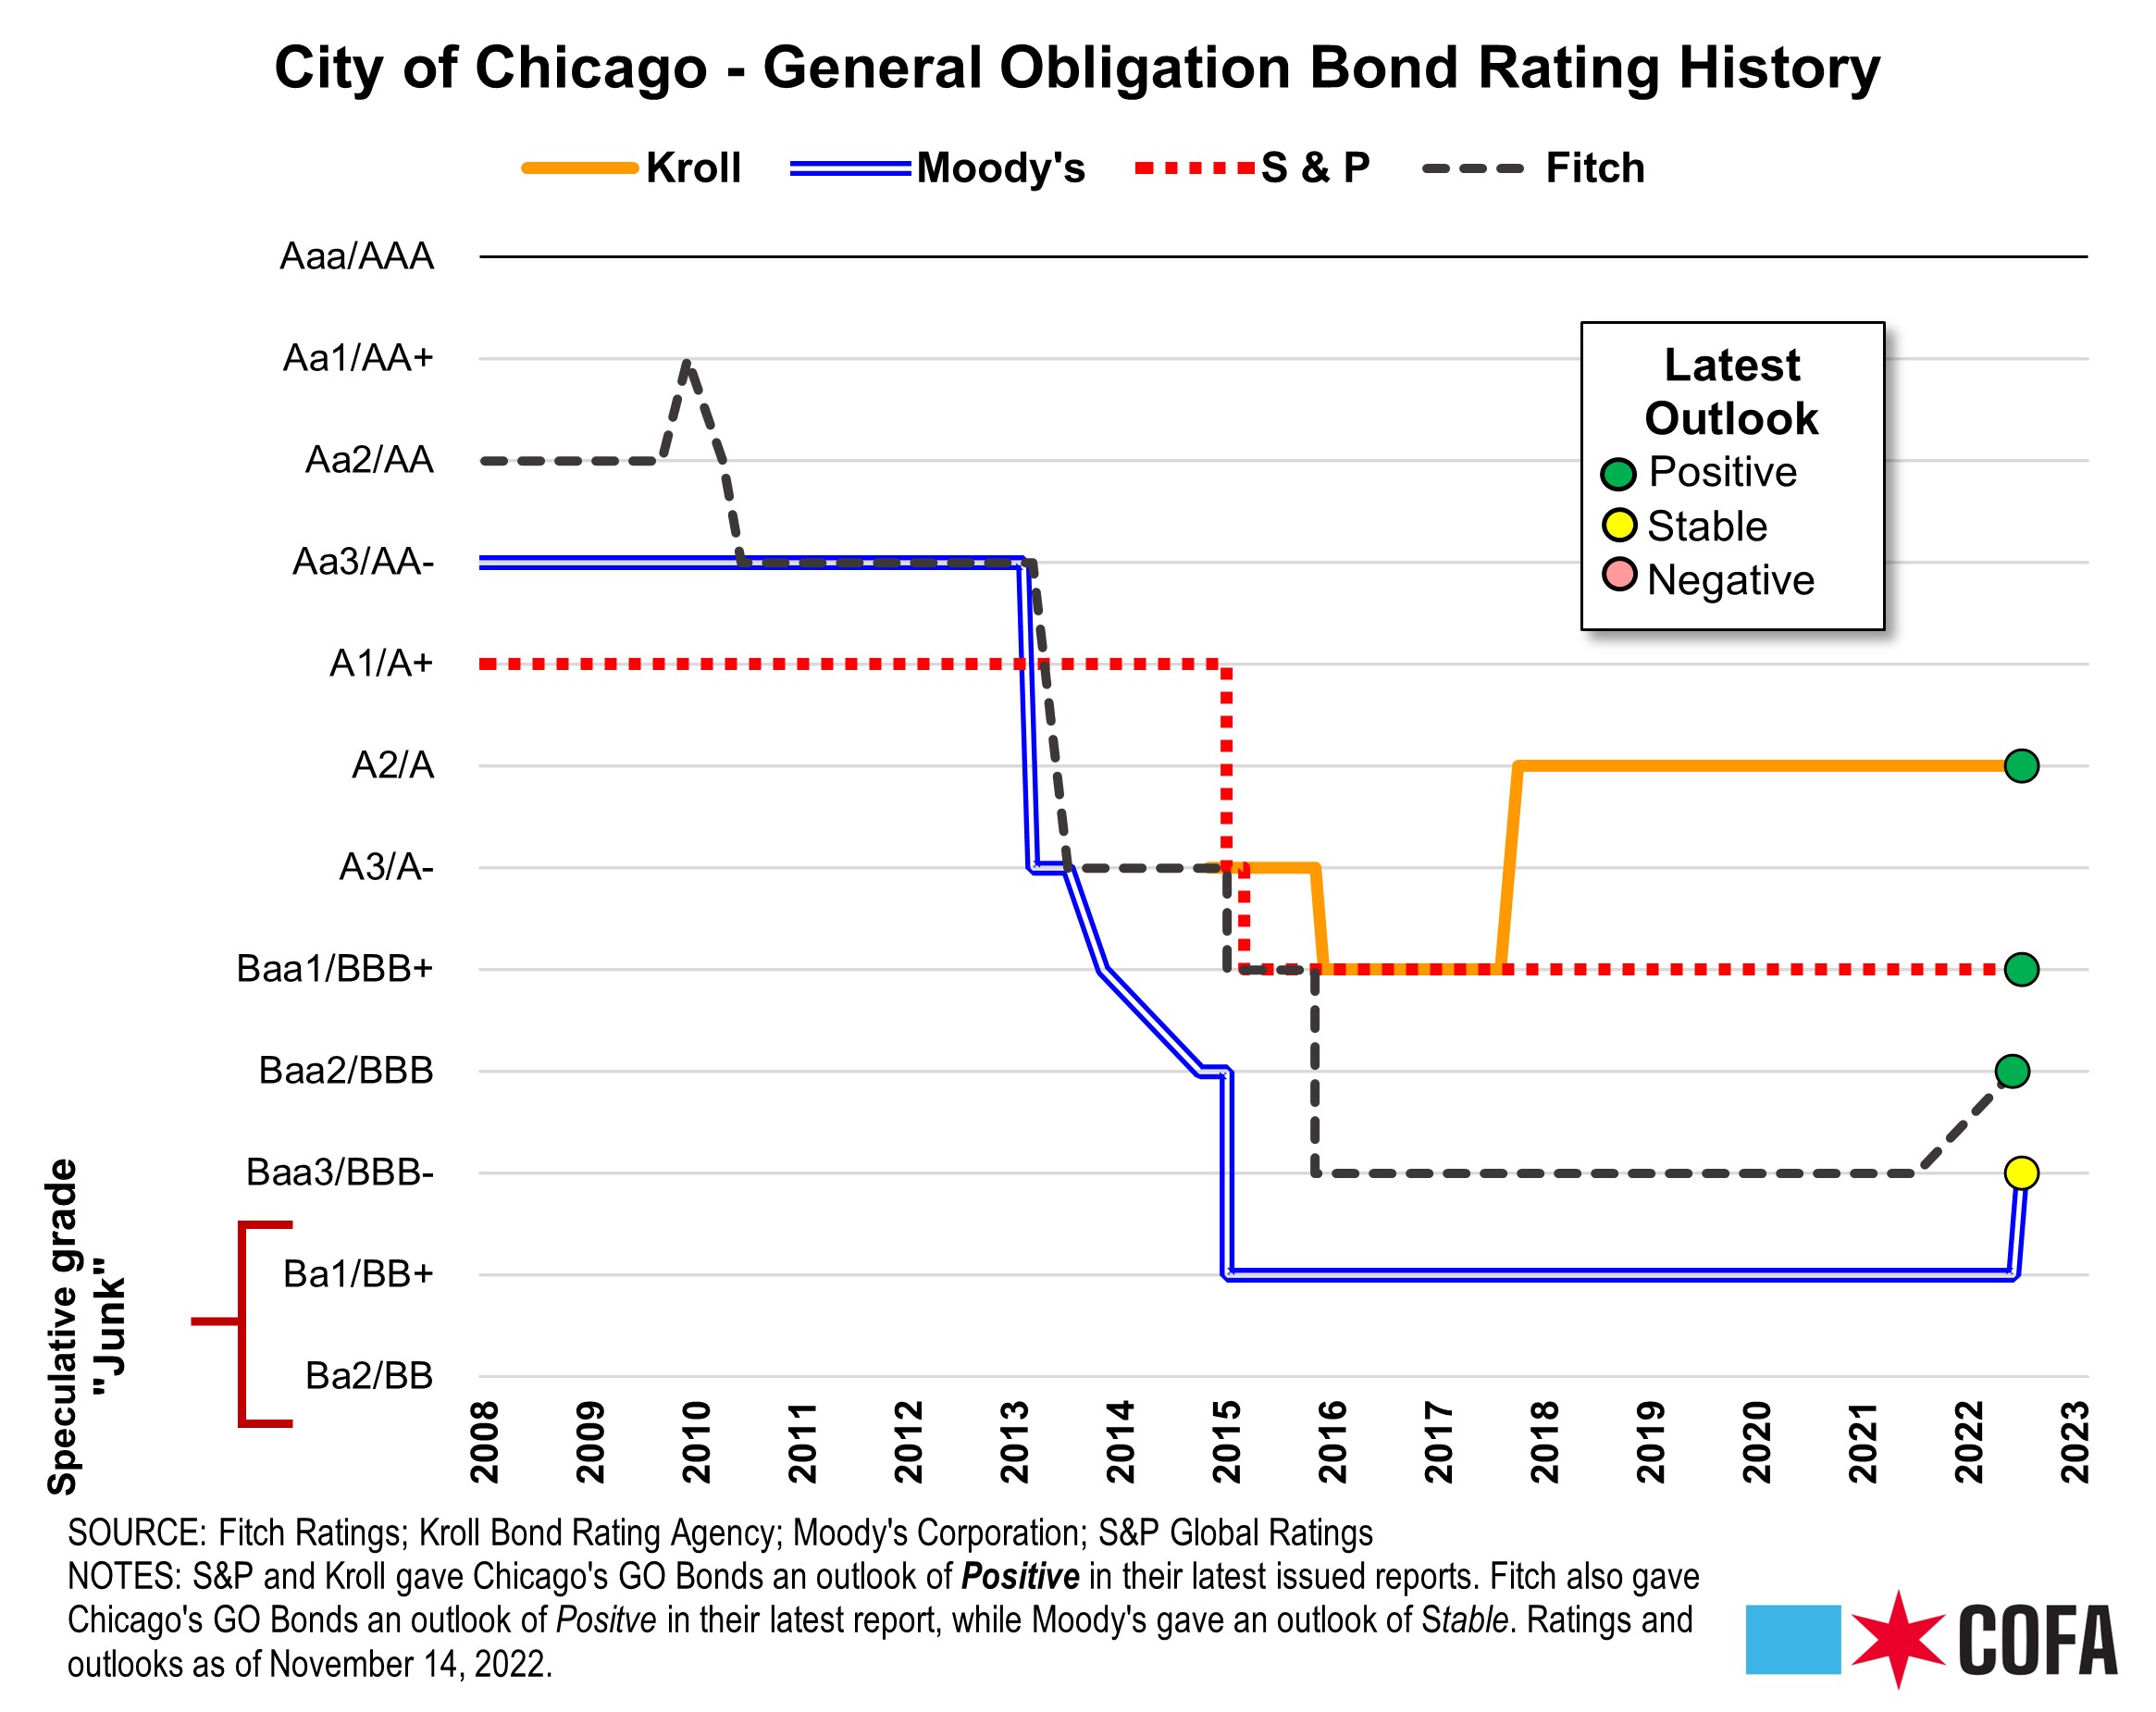 Image of a chart created by the Council Office of Financial Analysis (COFA) providing a historical overview of the City of Chicago's General Obligation (GO) Bond ratings.